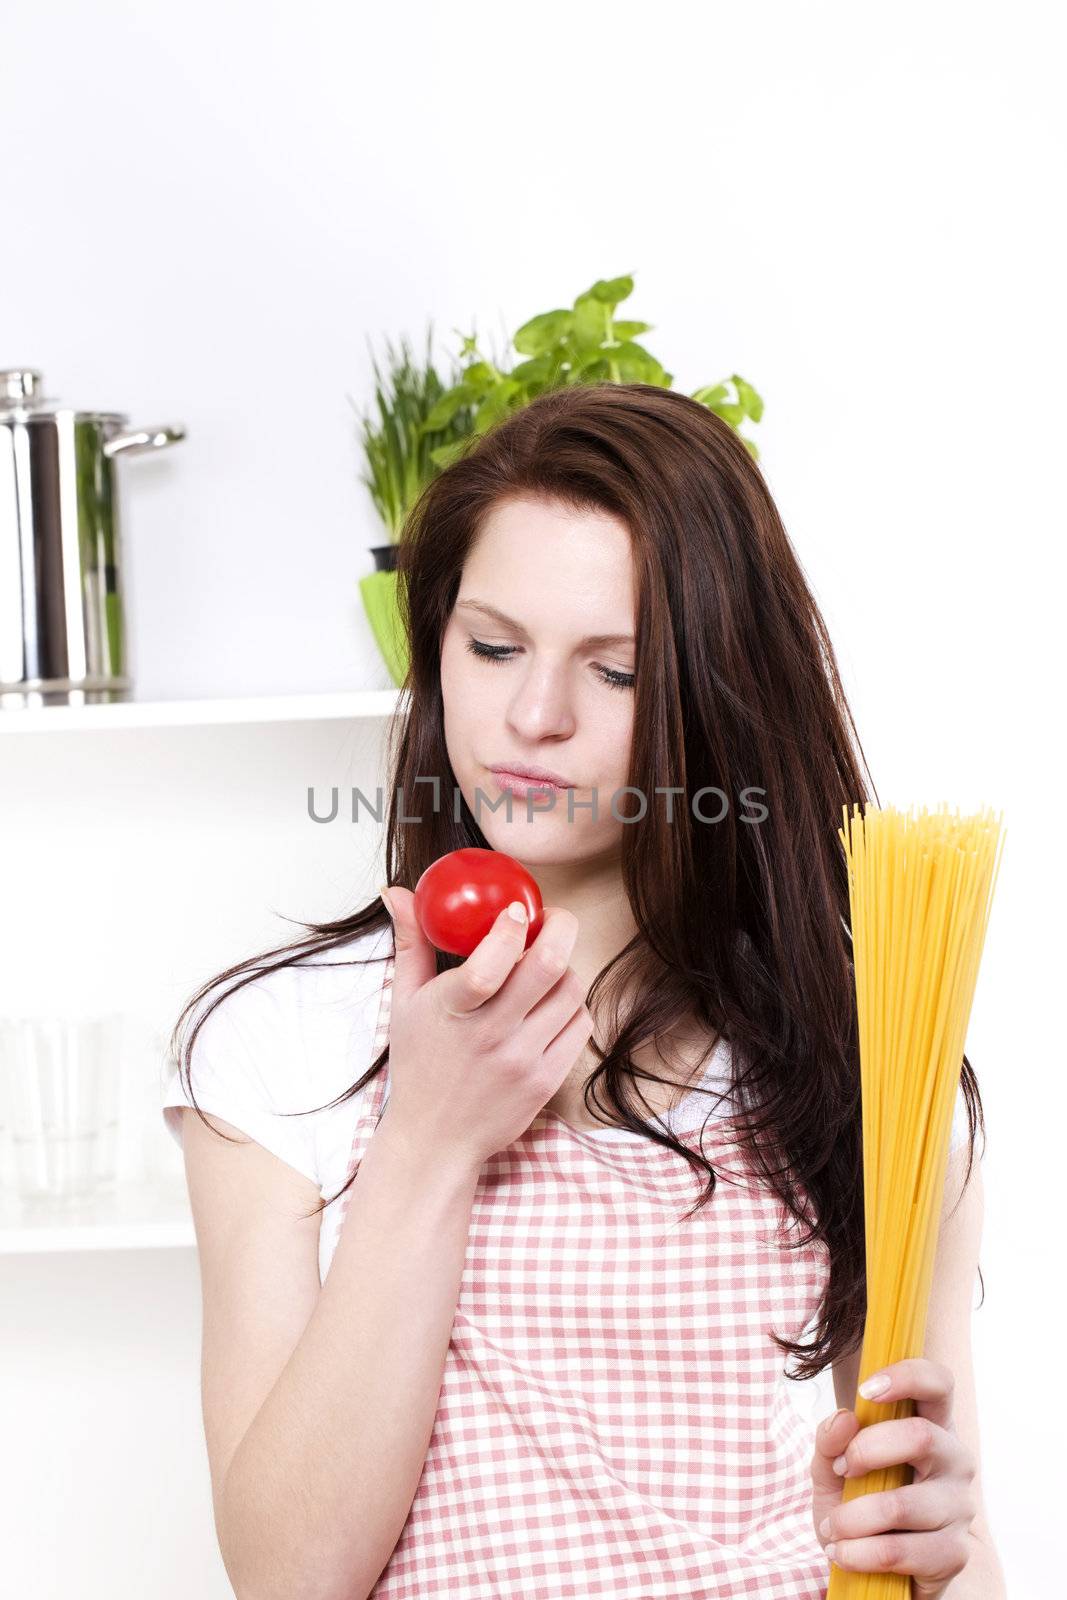 young pretty woman looking at a tomato holding spaghetti